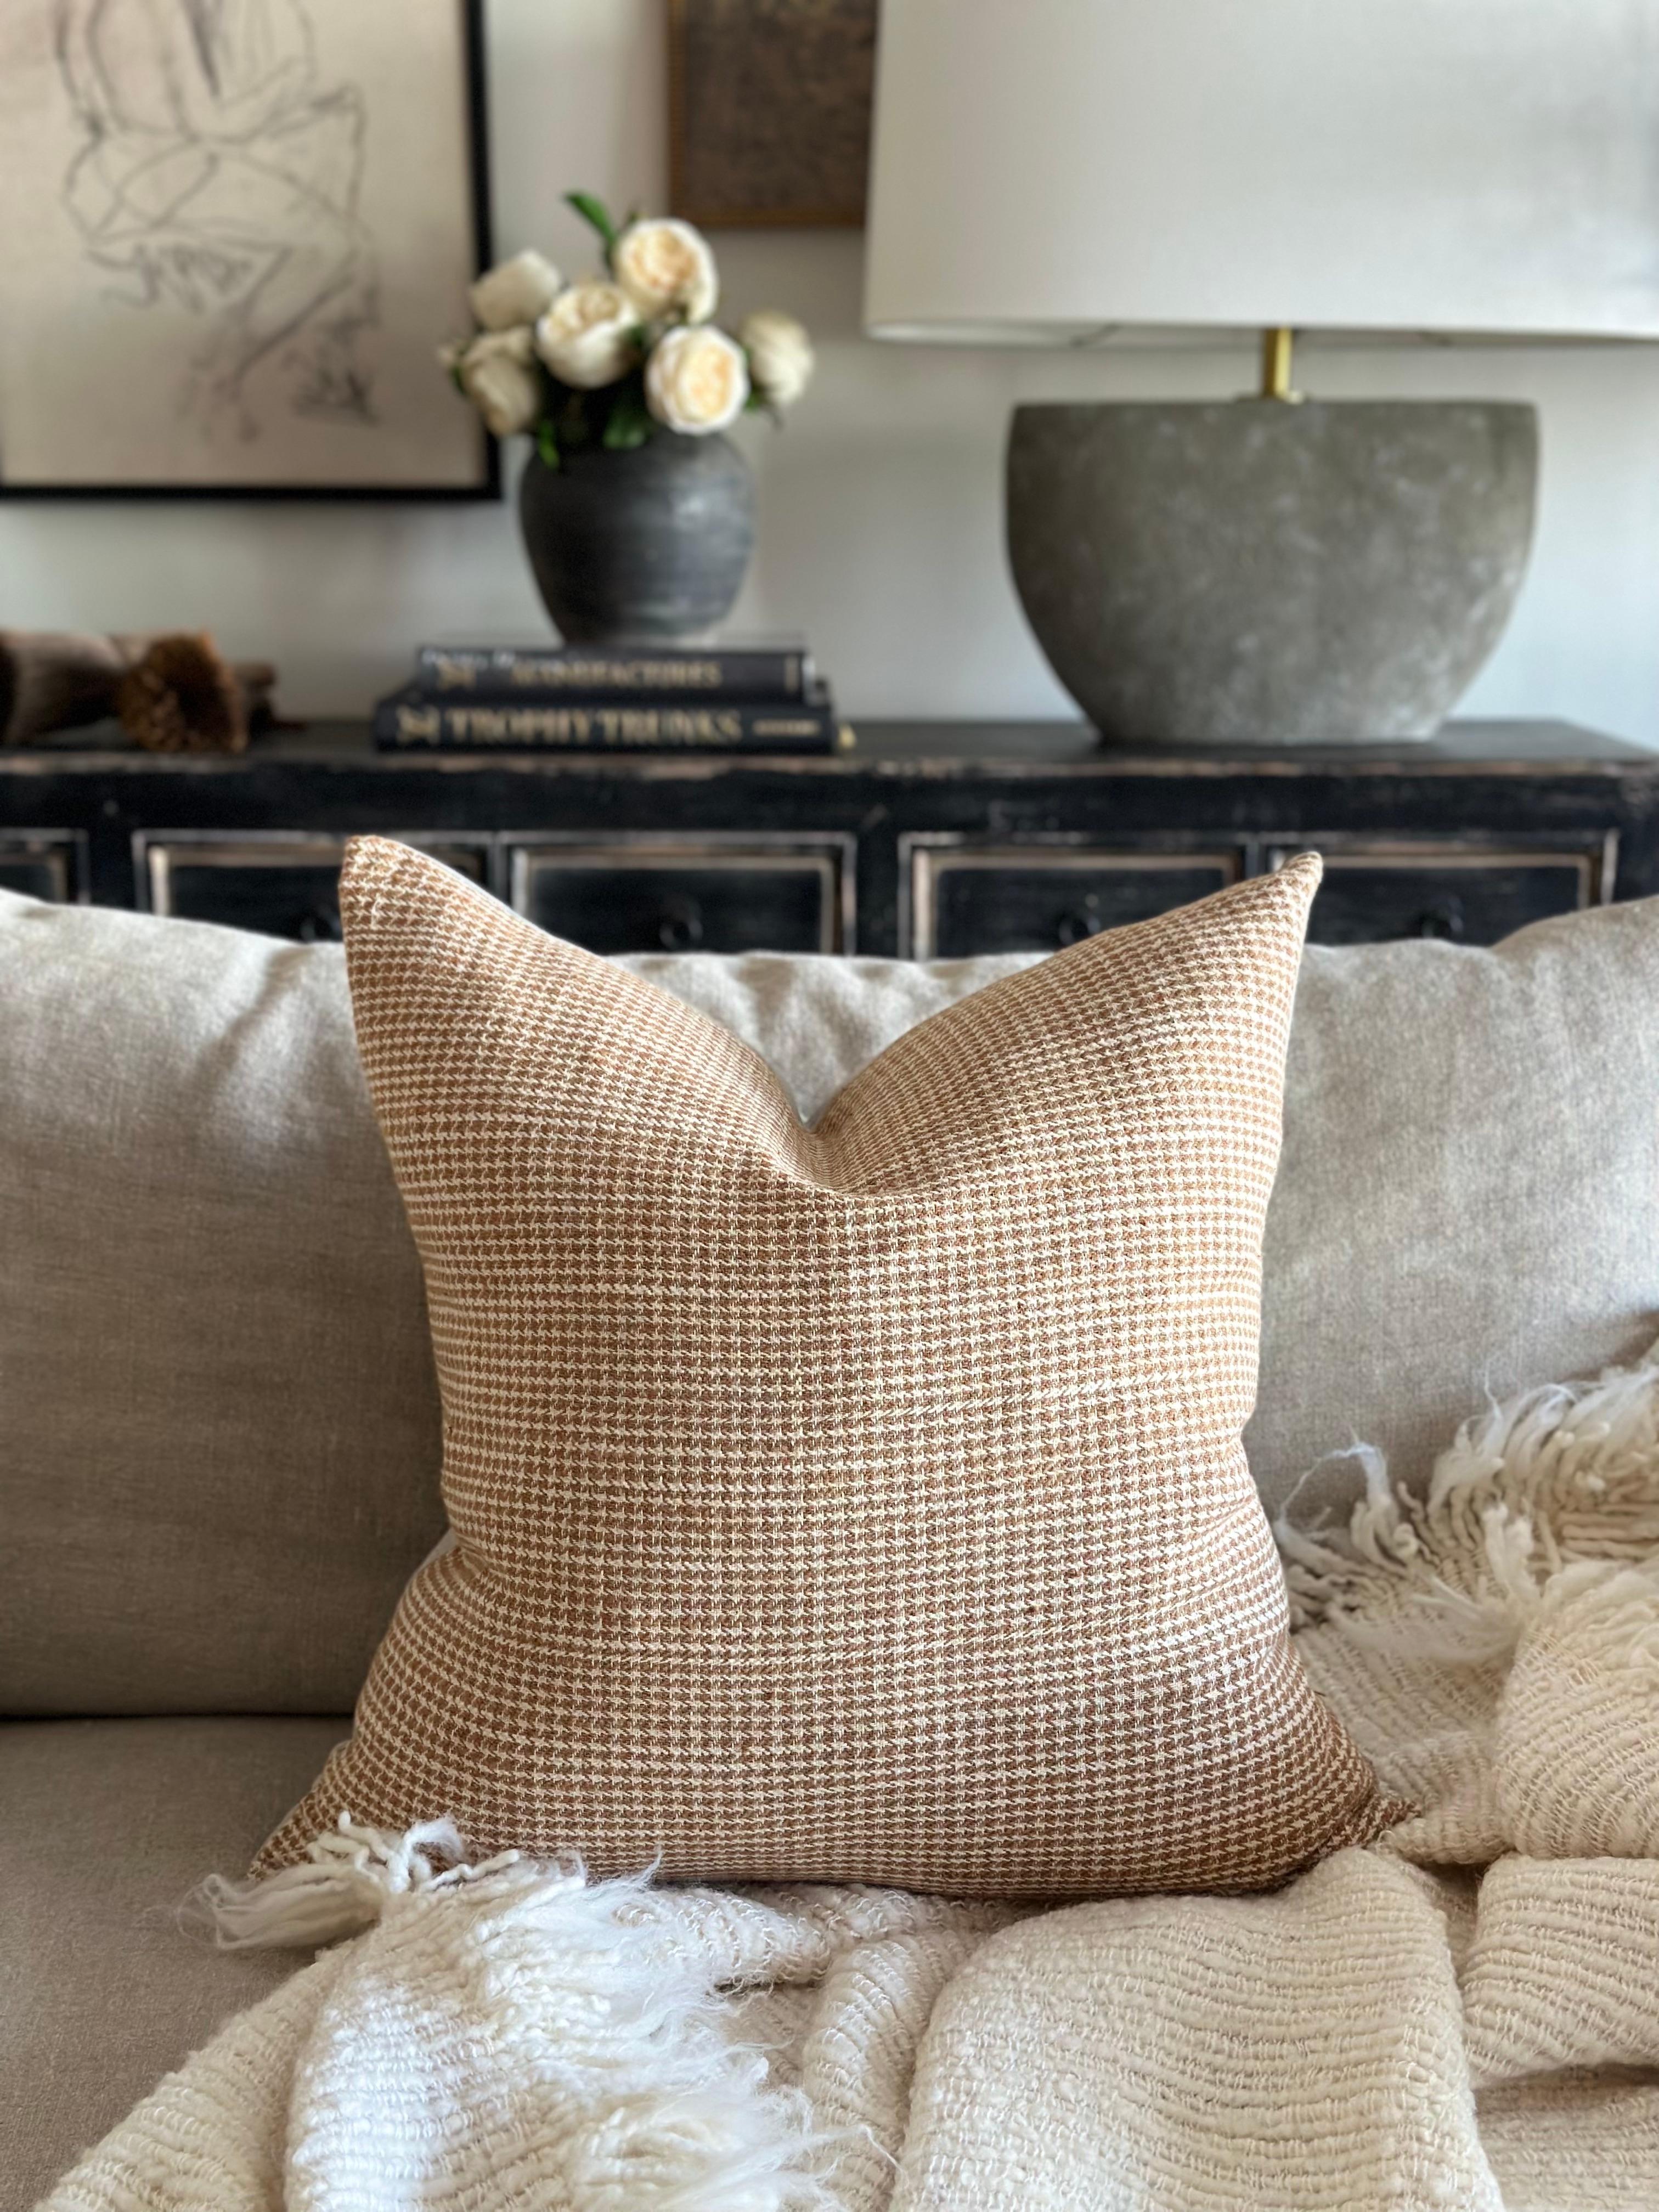 Our latest collection of beautiful hand blocked and linen pillows can be arranged to create beauty and bring a pop of color to your room while adding softness!   This item is made to order and can vary in lead times.
Includes a feather down